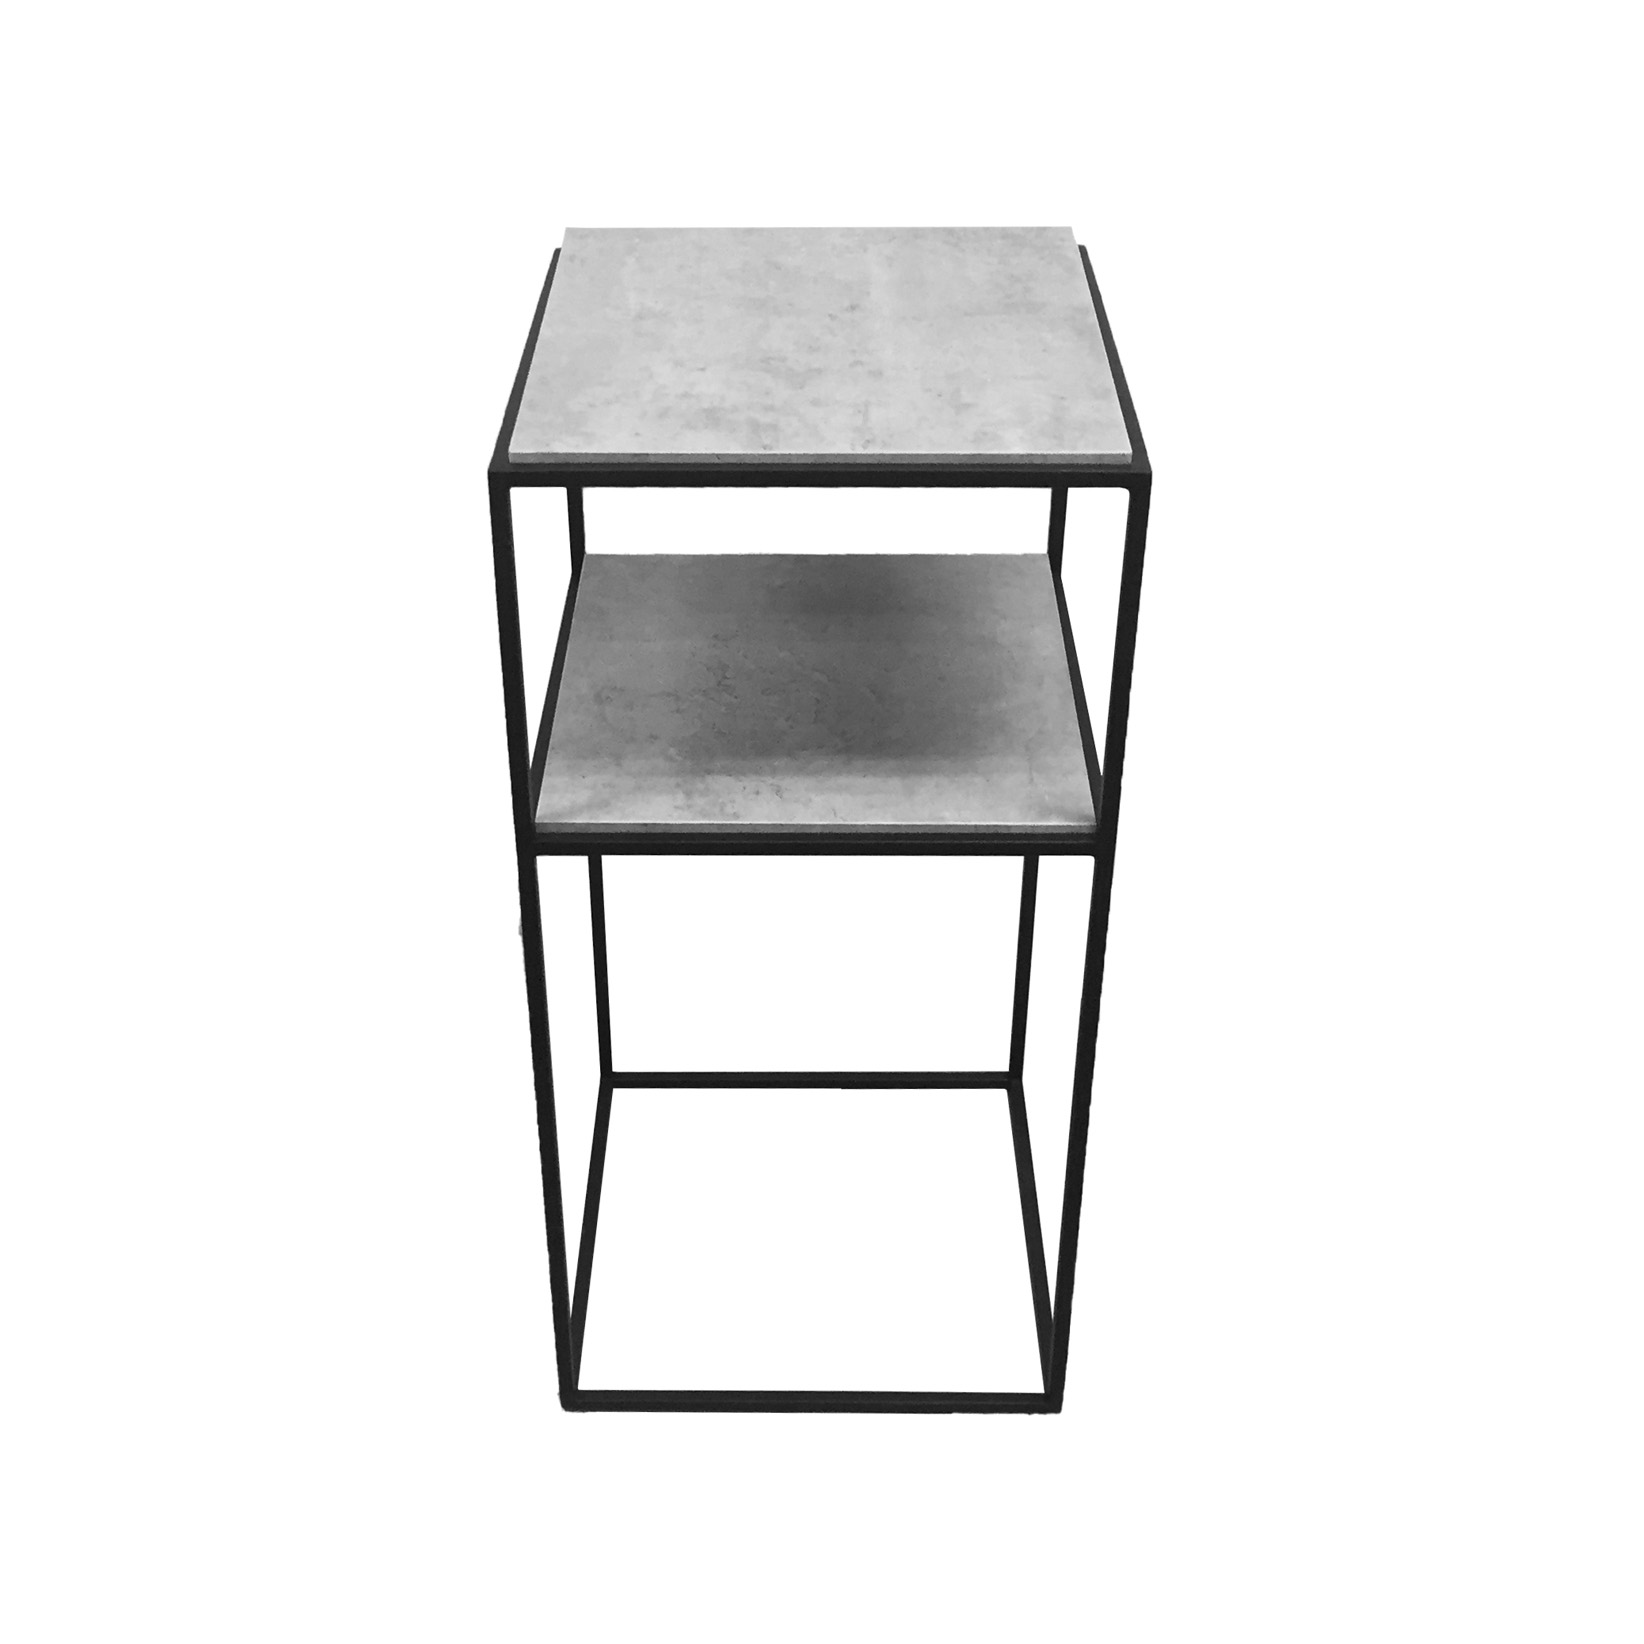 3D Concrete Look Top with 2 Layer Shelves in Metal Frame Side Table  